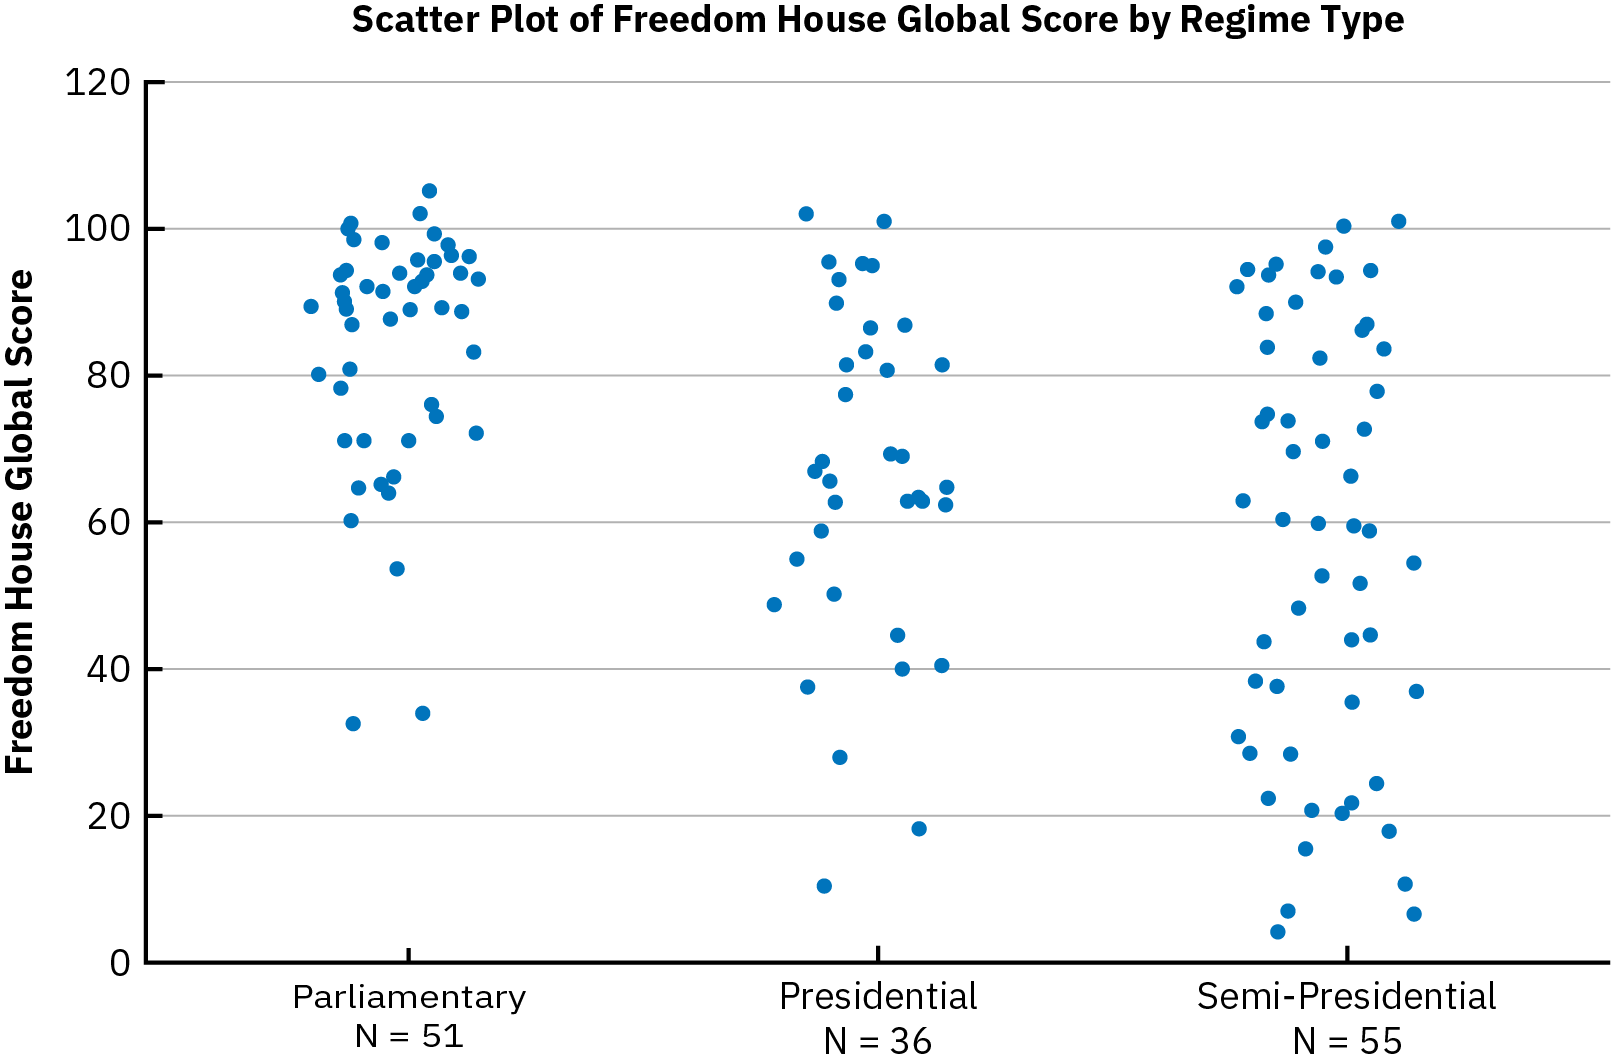 A scatter plot of Freedom House Global Freedom Scores compares the dispersement of parliamentary, presidential, and semi-presidential countries.